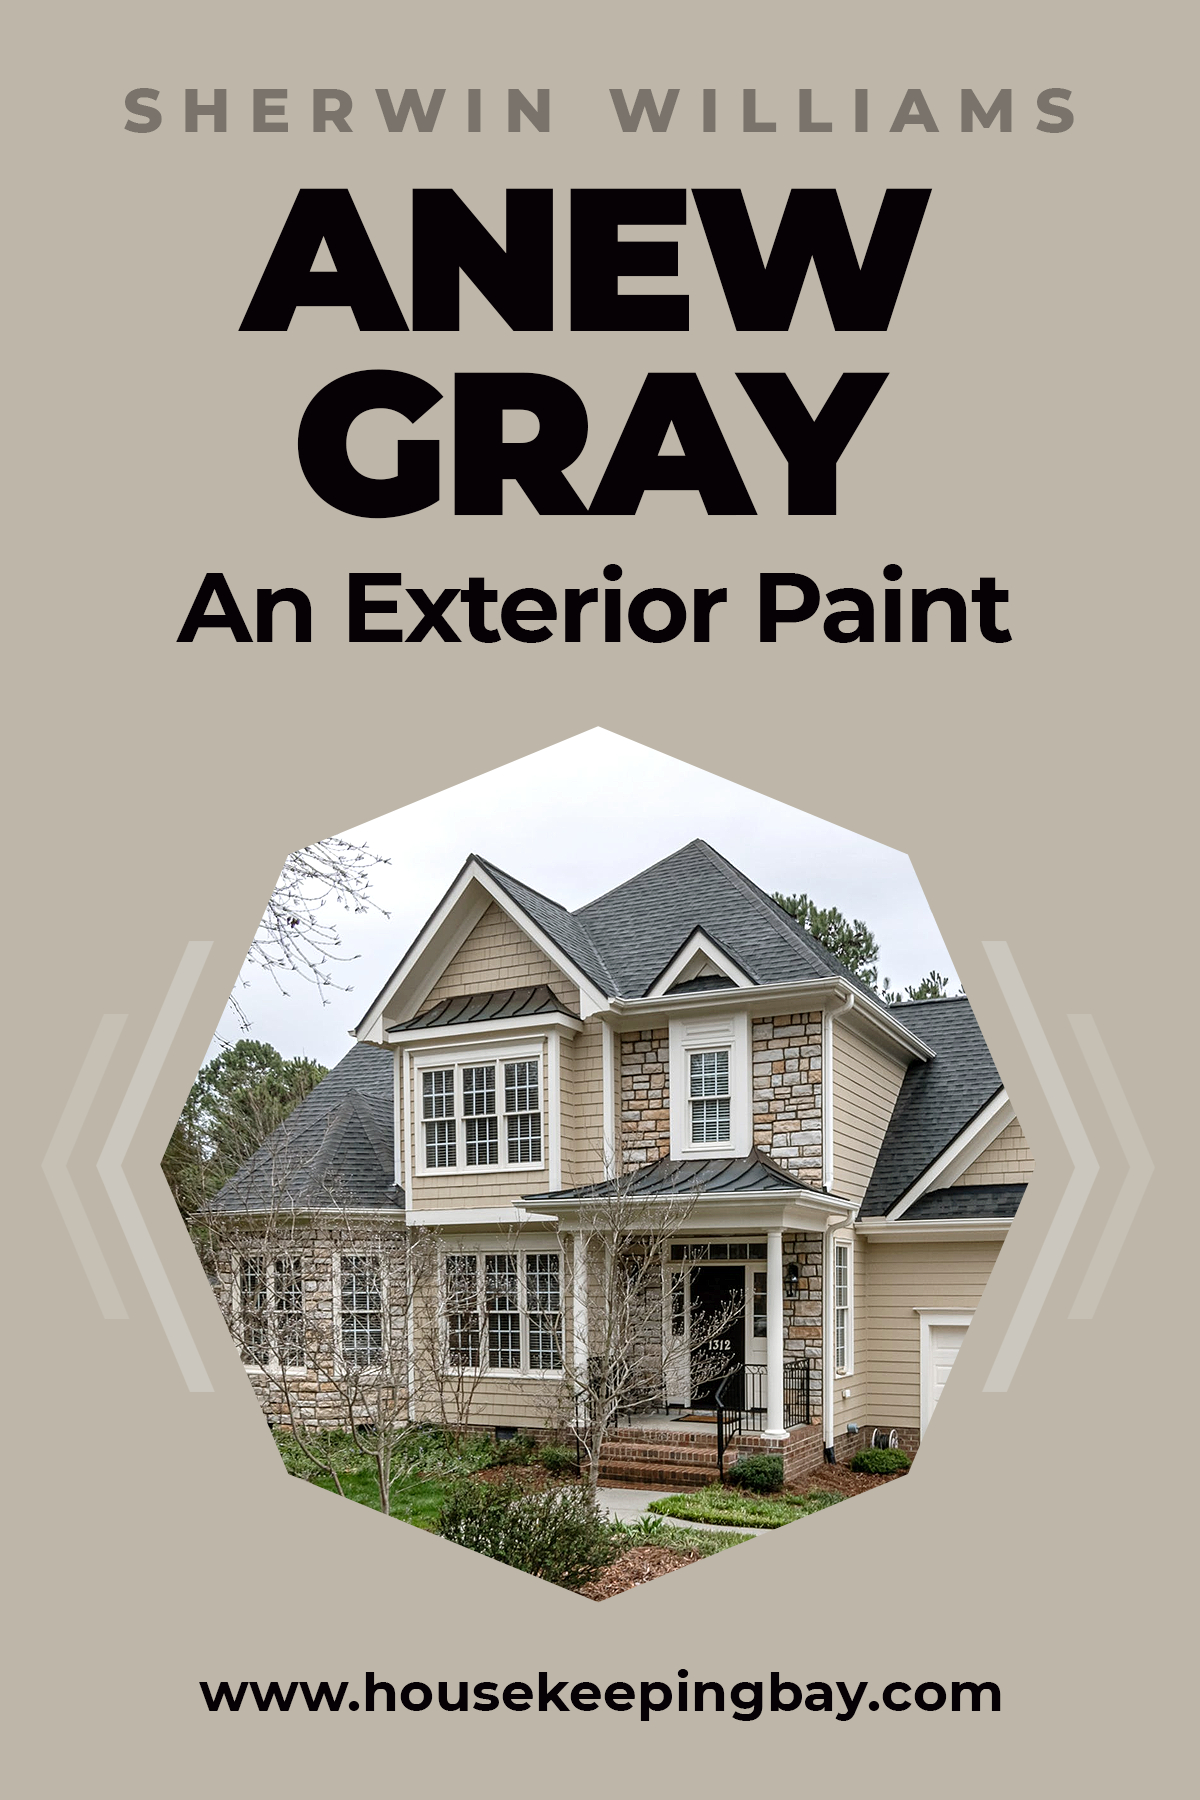 Anew Gray An Exterior Paint